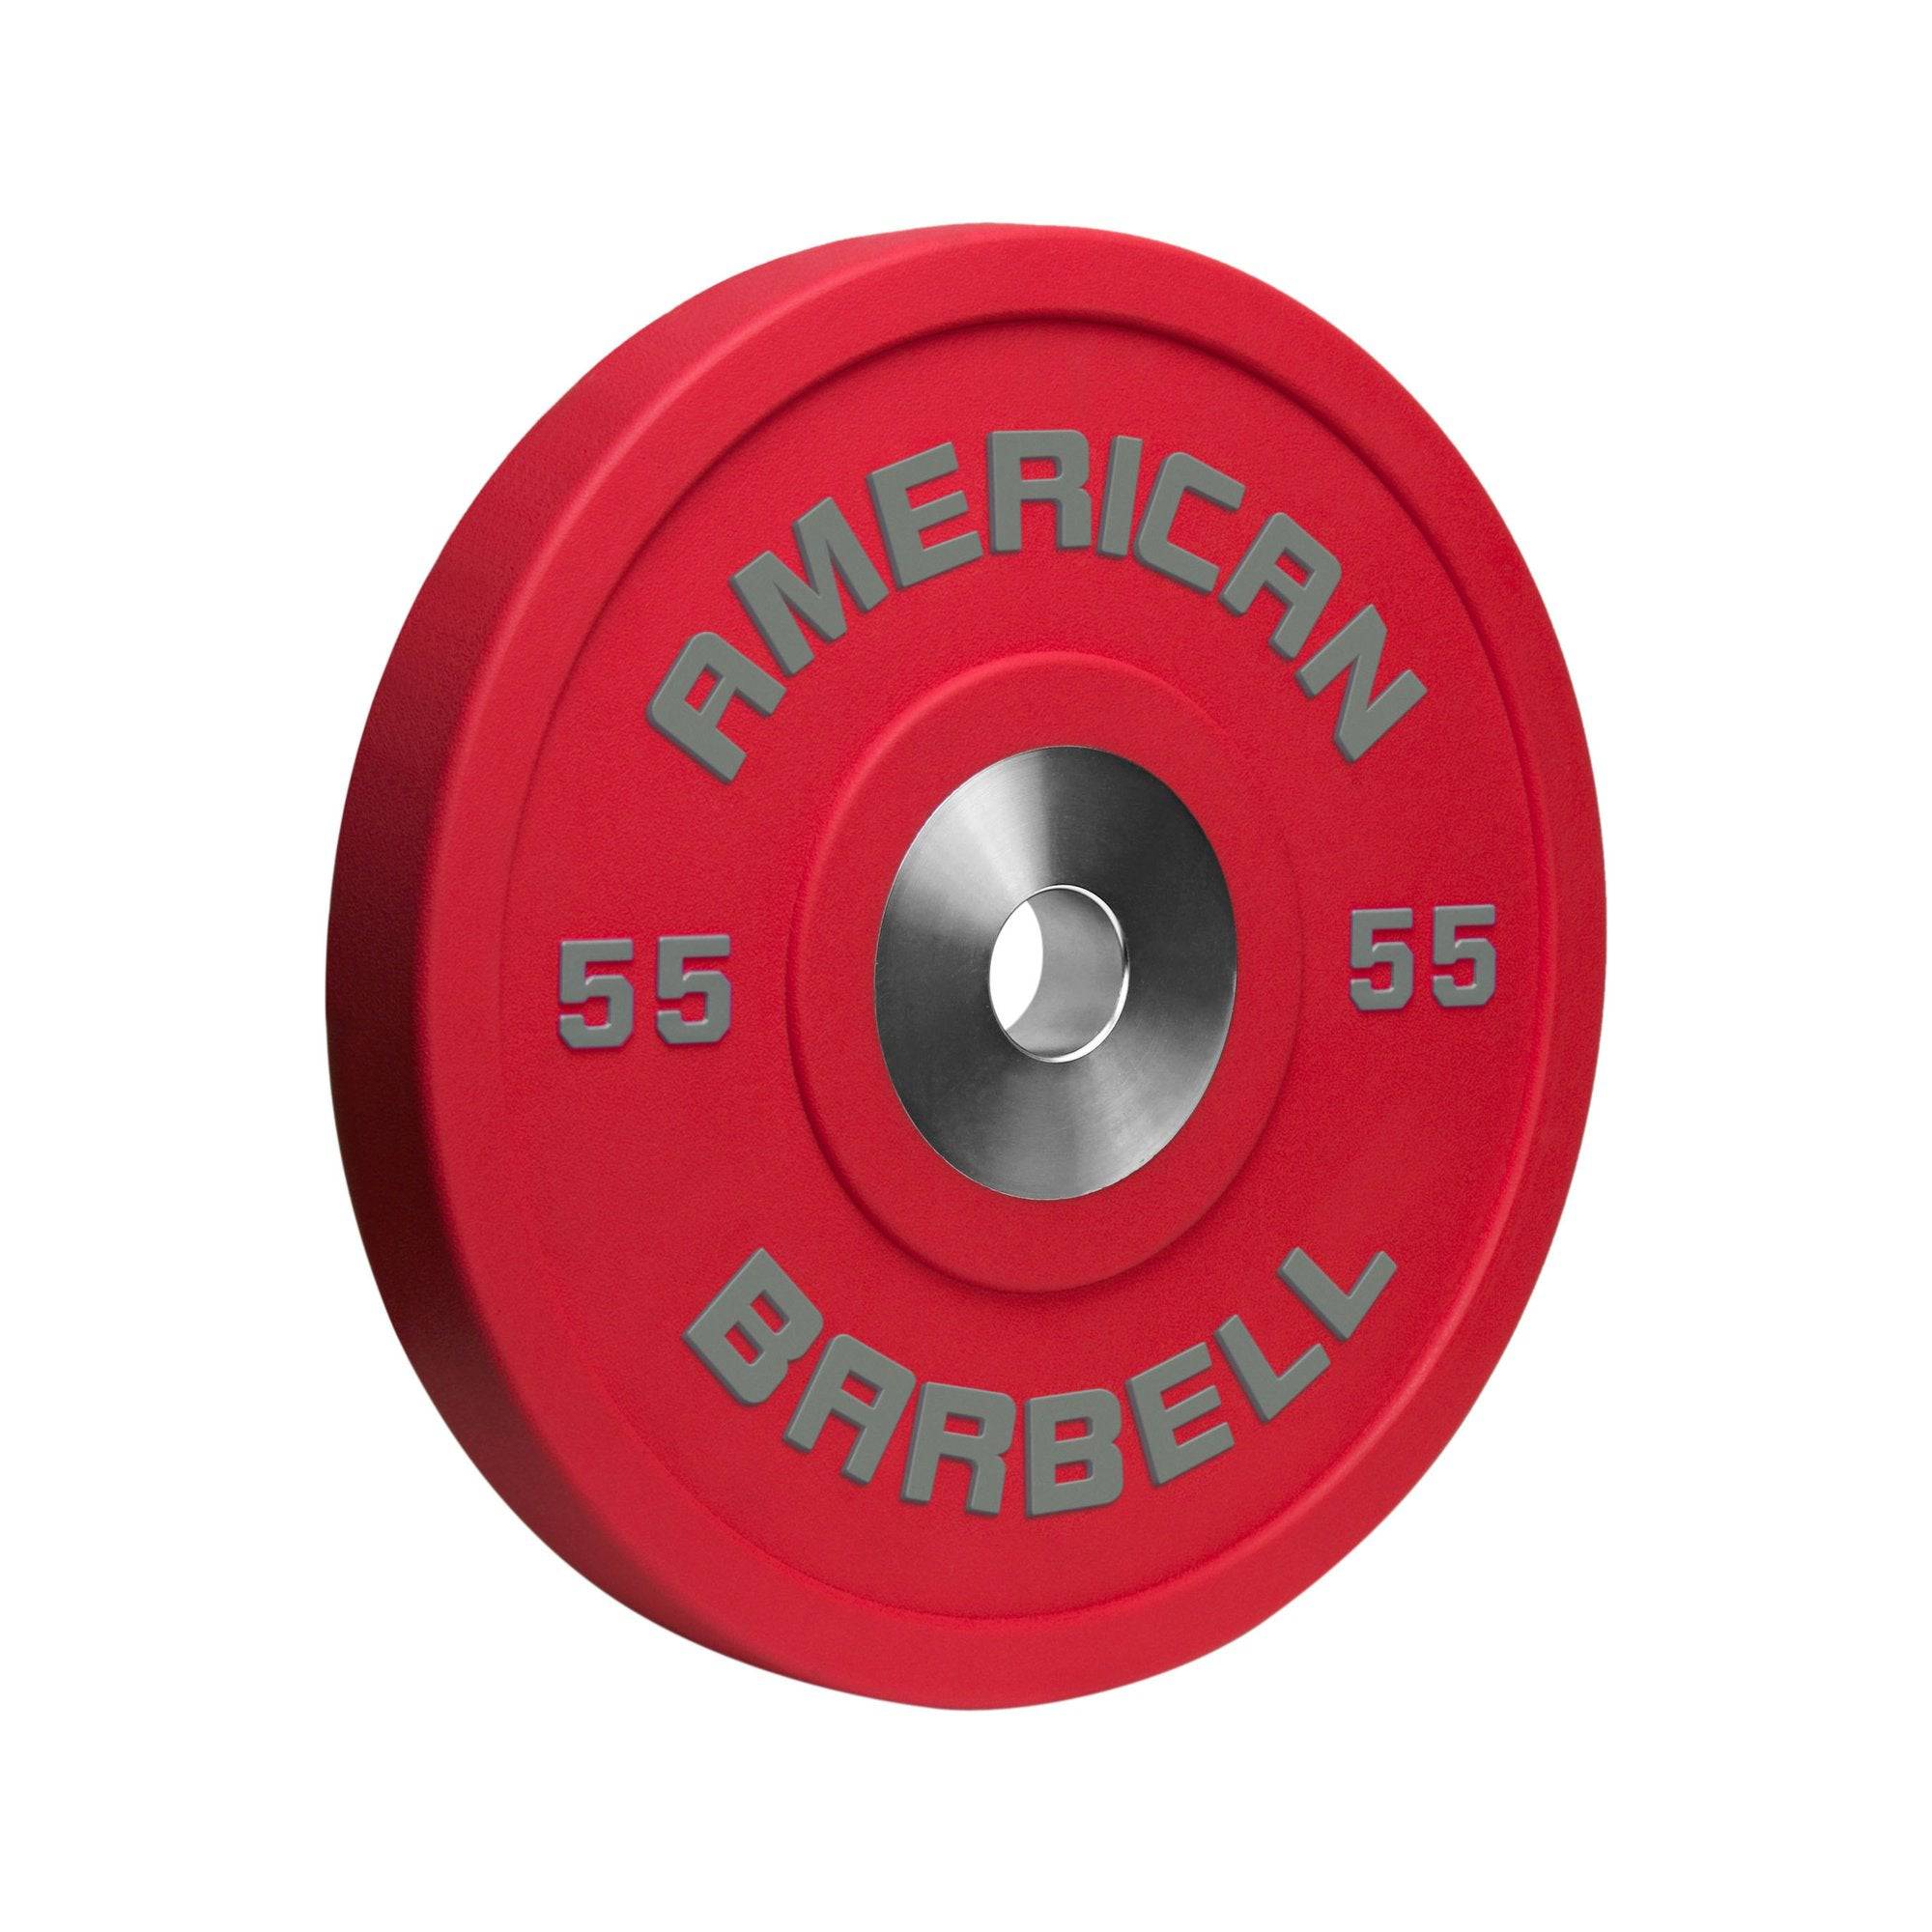 American Barbell | Bumper Plates - Color Urethane Pro Series - Pounds - XTC Fitness - Exercise Equipment Superstore - Canada - Competition Bumper Plates